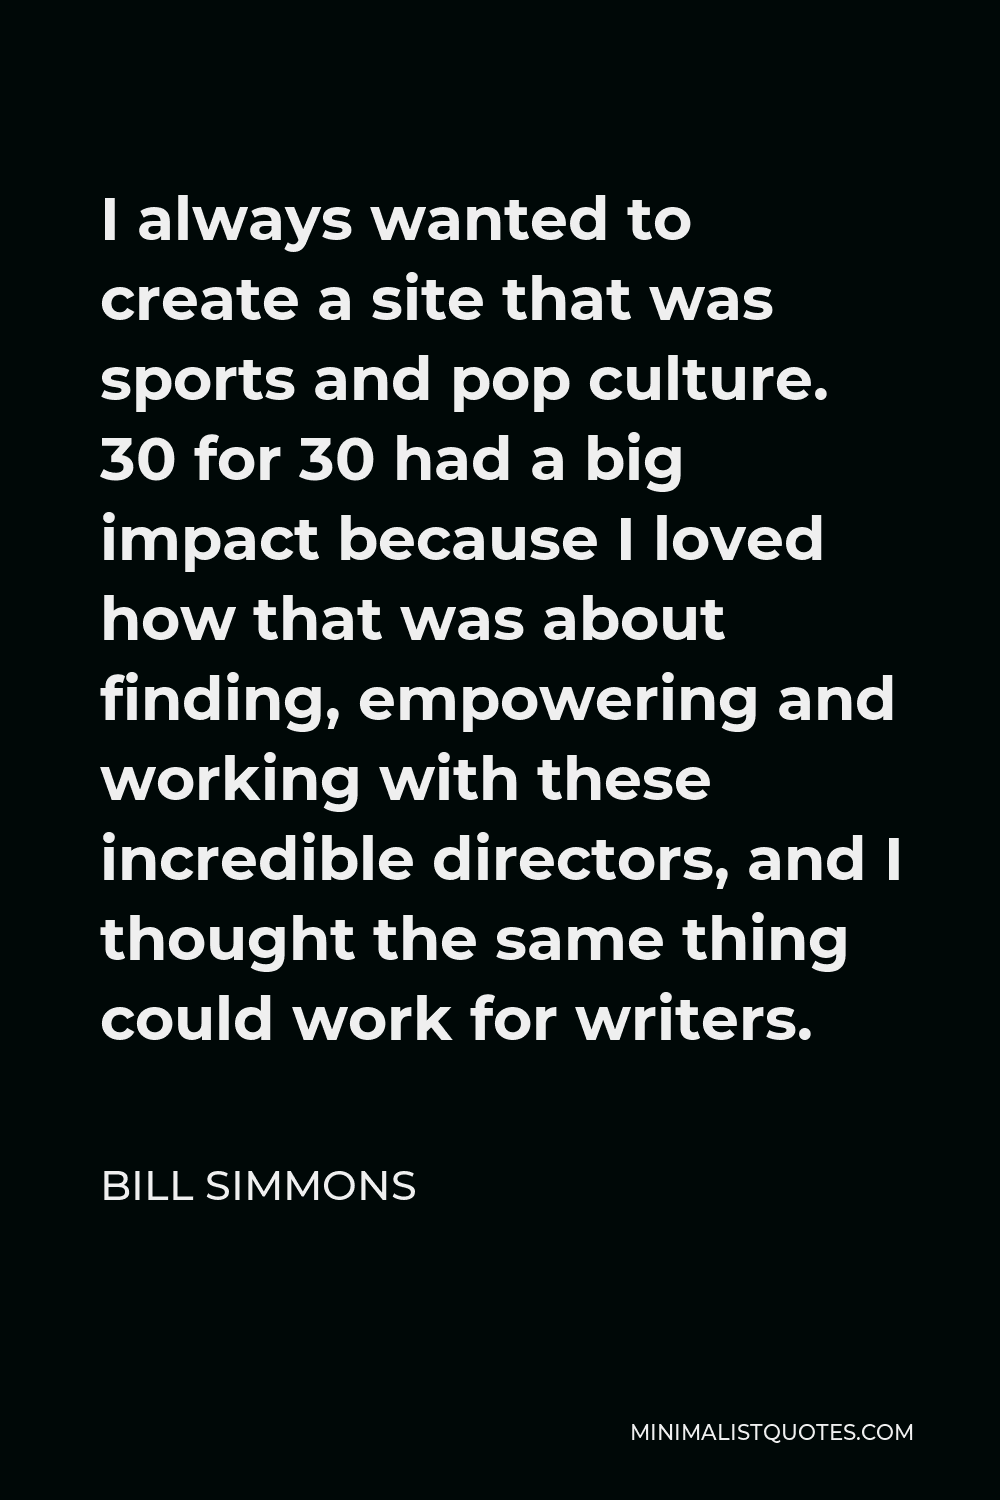 Bill Simmons Quote - I always wanted to create a site that was sports and pop culture. 30 for 30 had a big impact because I loved how that was about finding, empowering and working with these incredible directors, and I thought the same thing could work for writers.